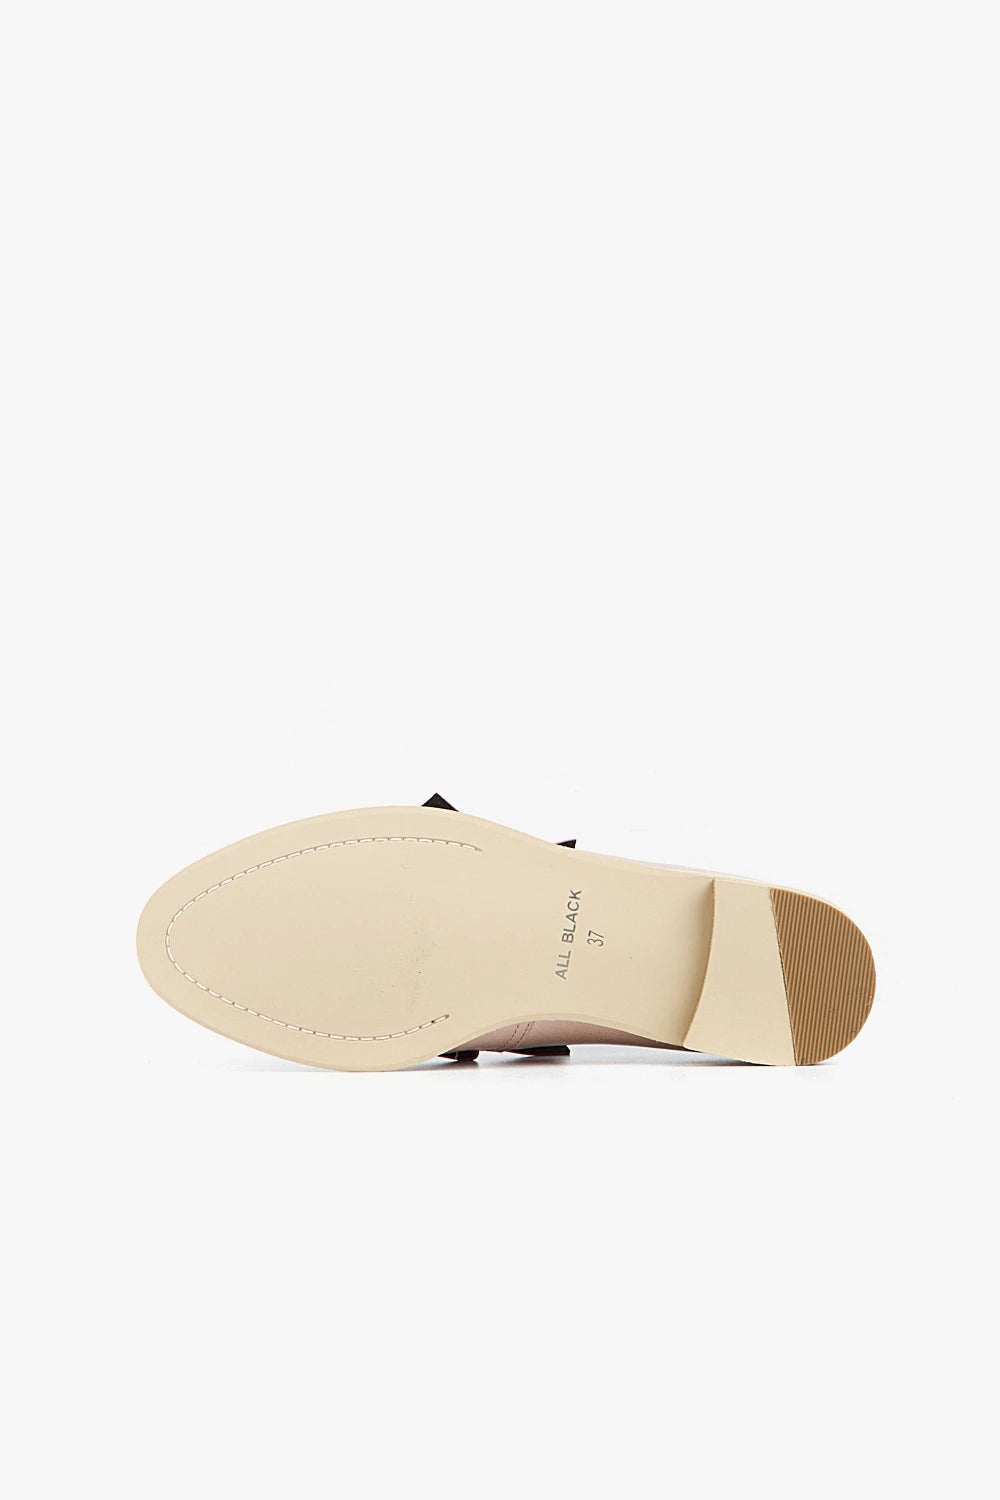 Flatbow Cowman Loafer